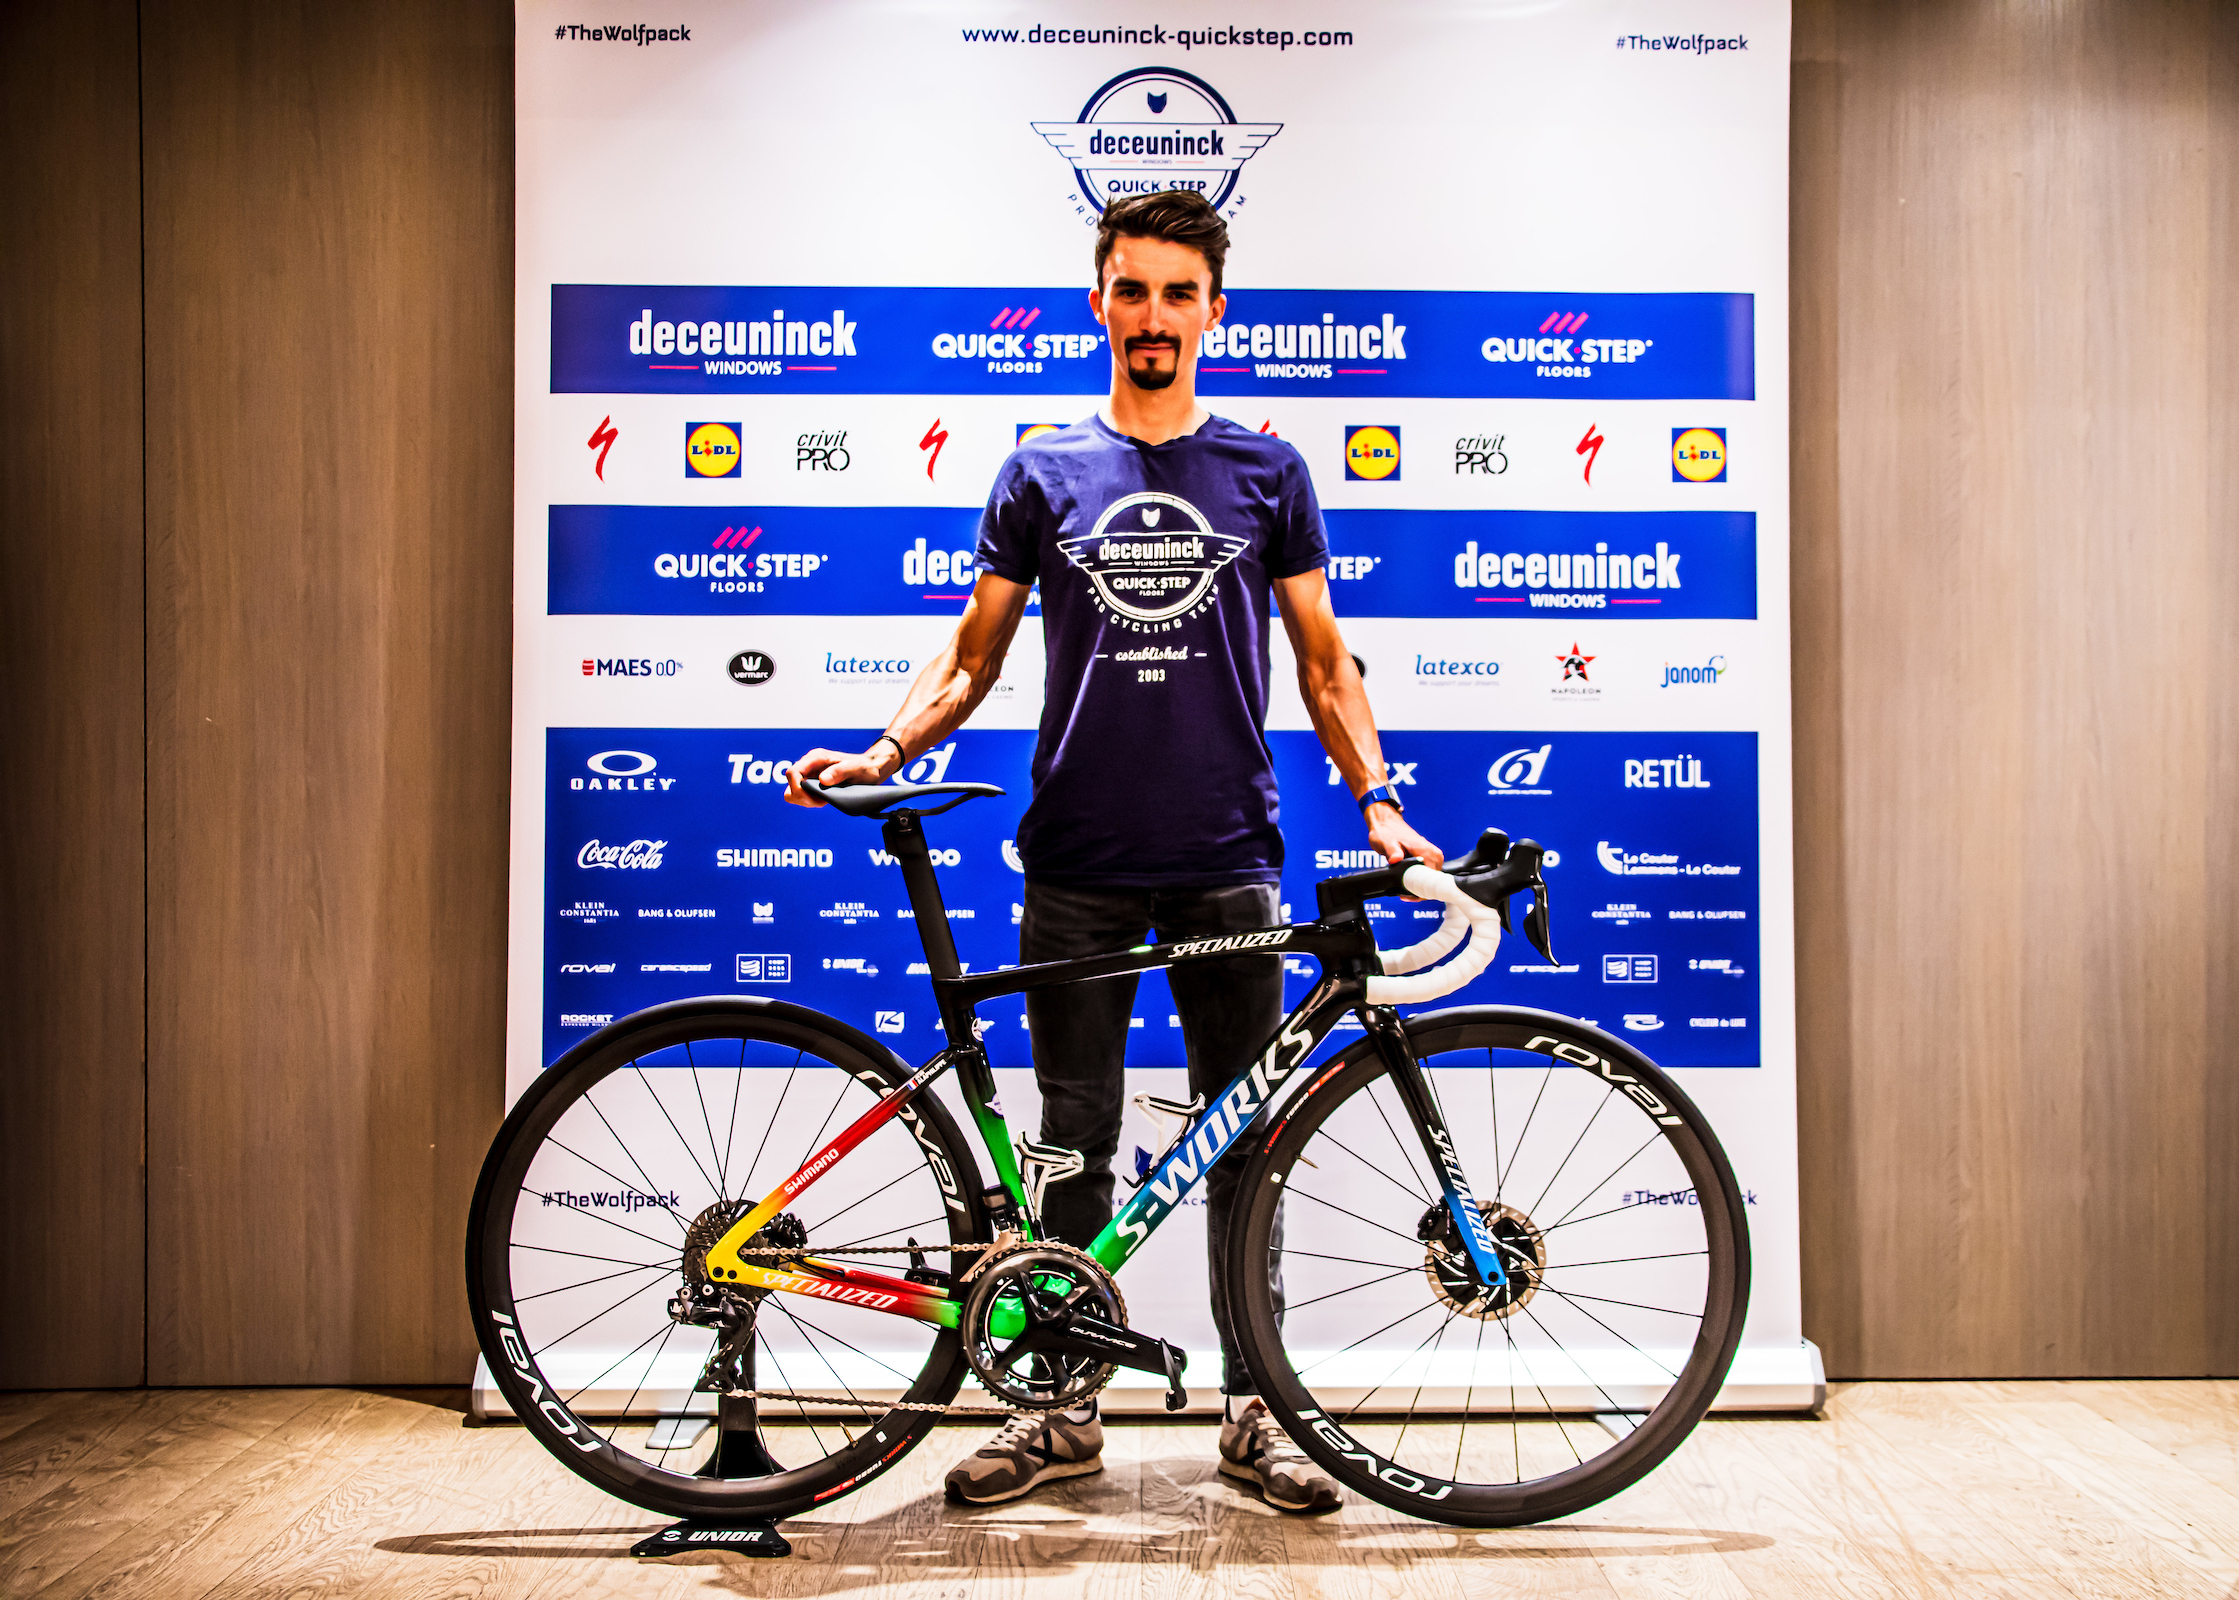 Everyone loves New Bike Day, especially World Champion Julian Alaphilippe. Photo by Wout Beel/Deceuninck - Quick-Step